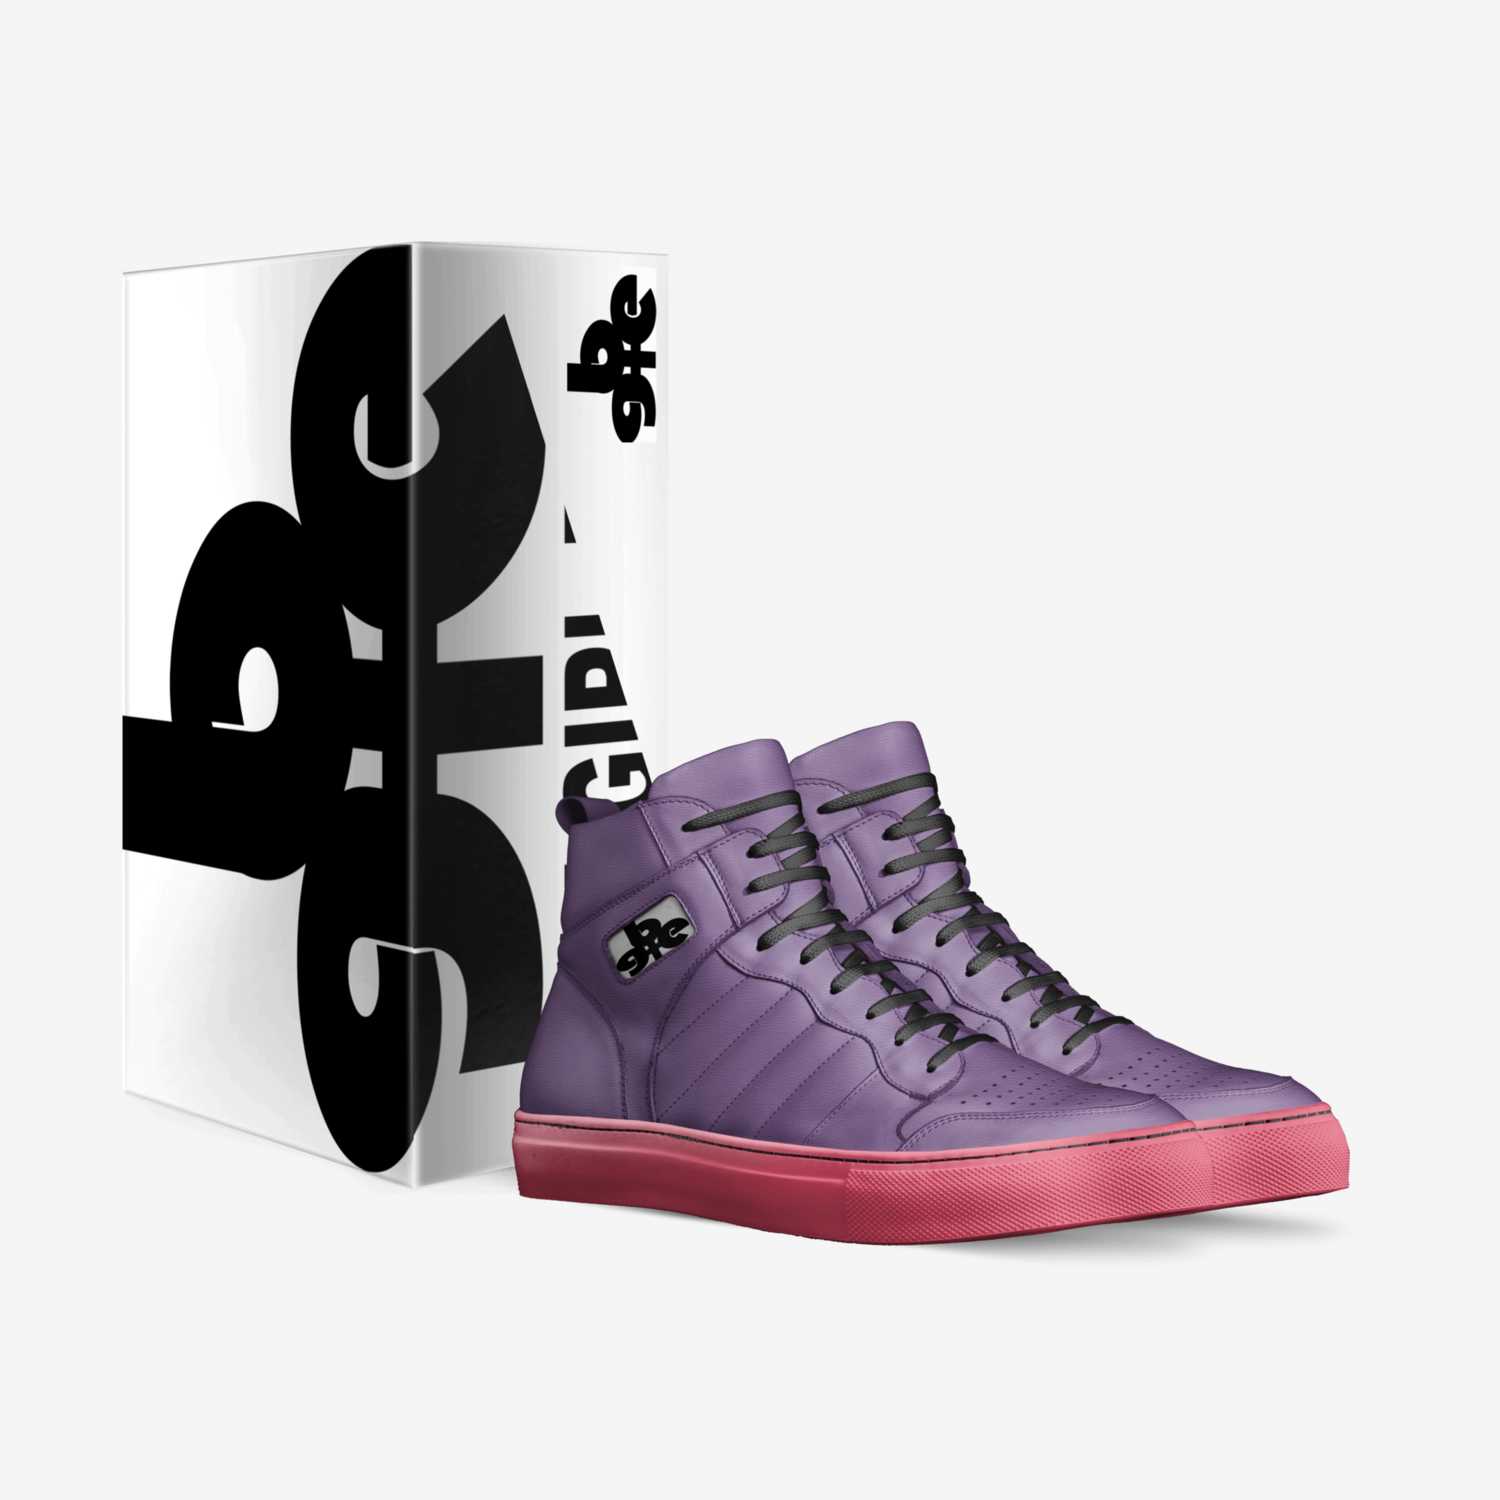 KB Purps Sj1 custom made in Italy shoes by Baby-girl Elite | Box view